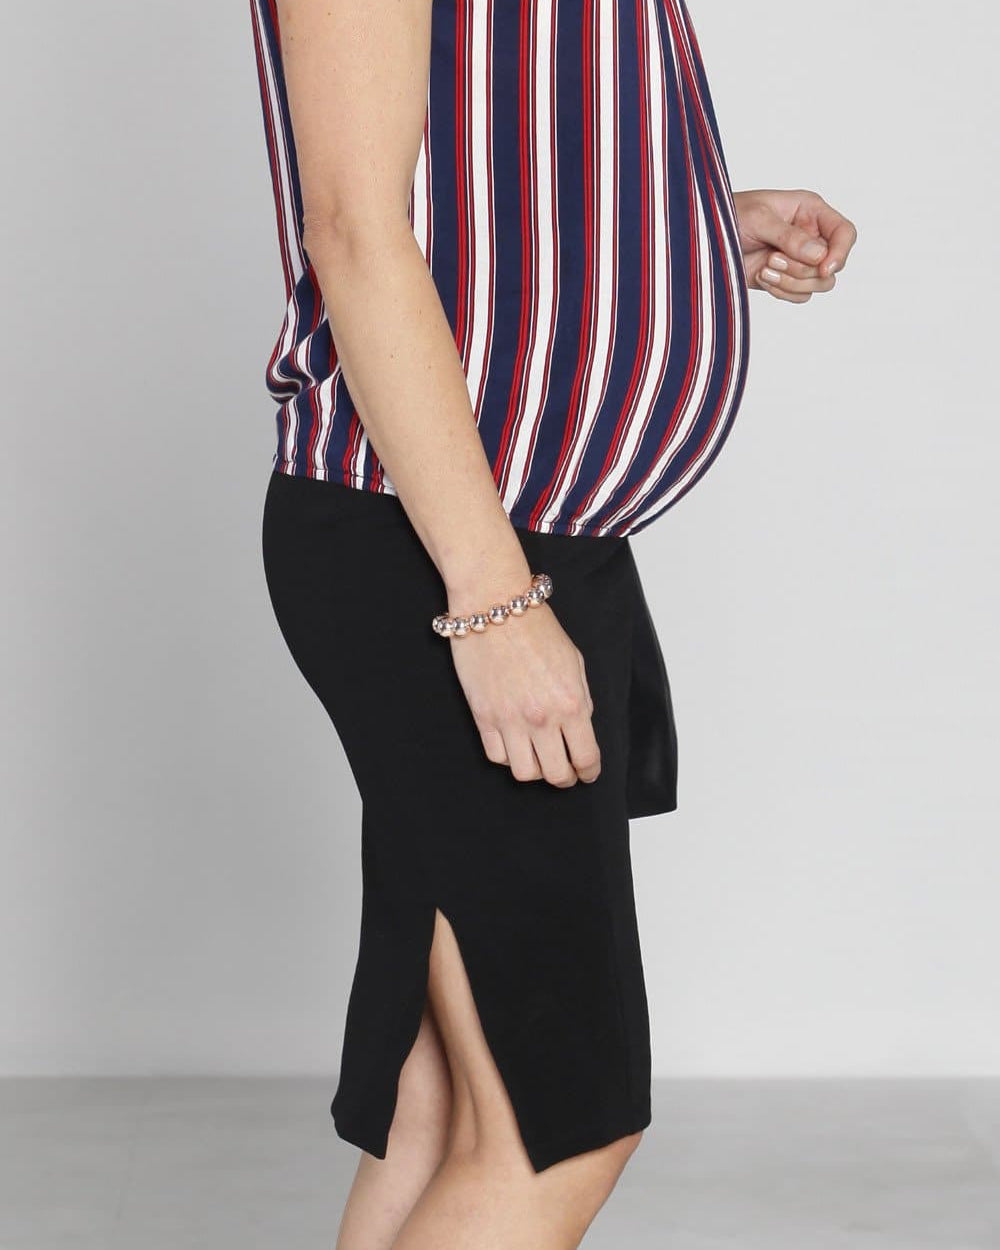 Maternity High Waist Stretchy Pencil Skirt - Black - Angel Maternity - Maternity clothes - shop online (10088245830)